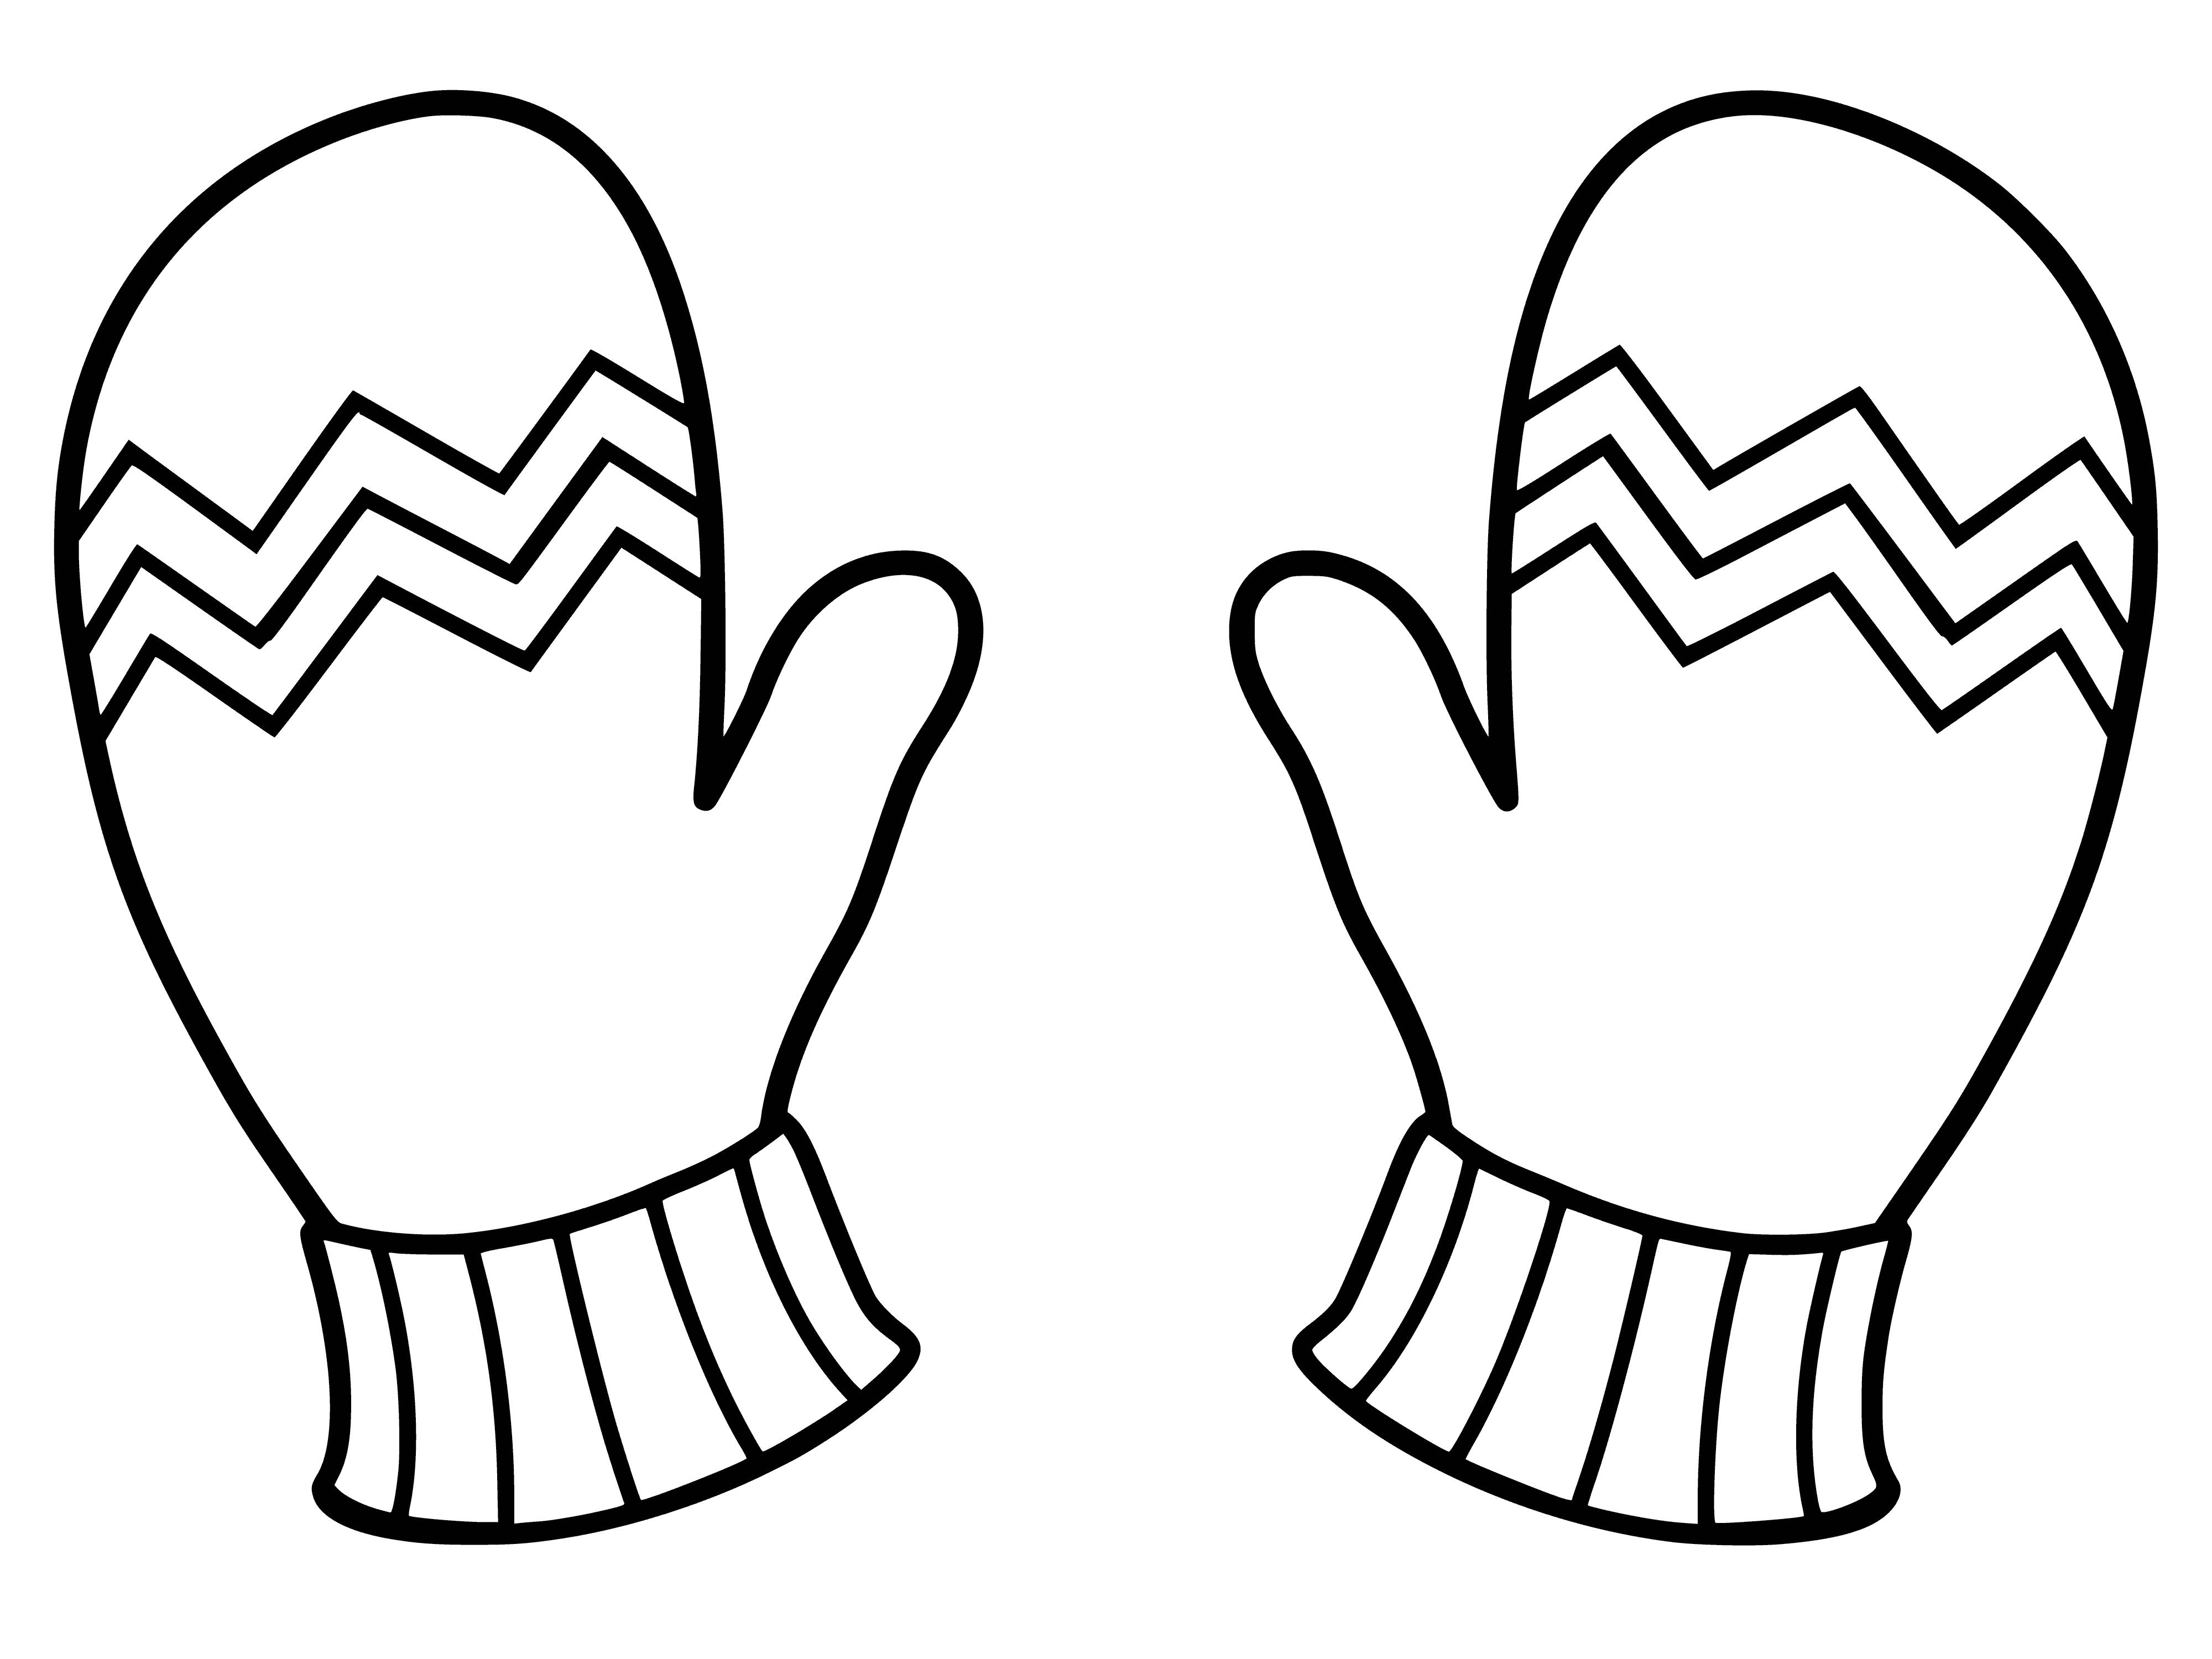 Mittens coloring page